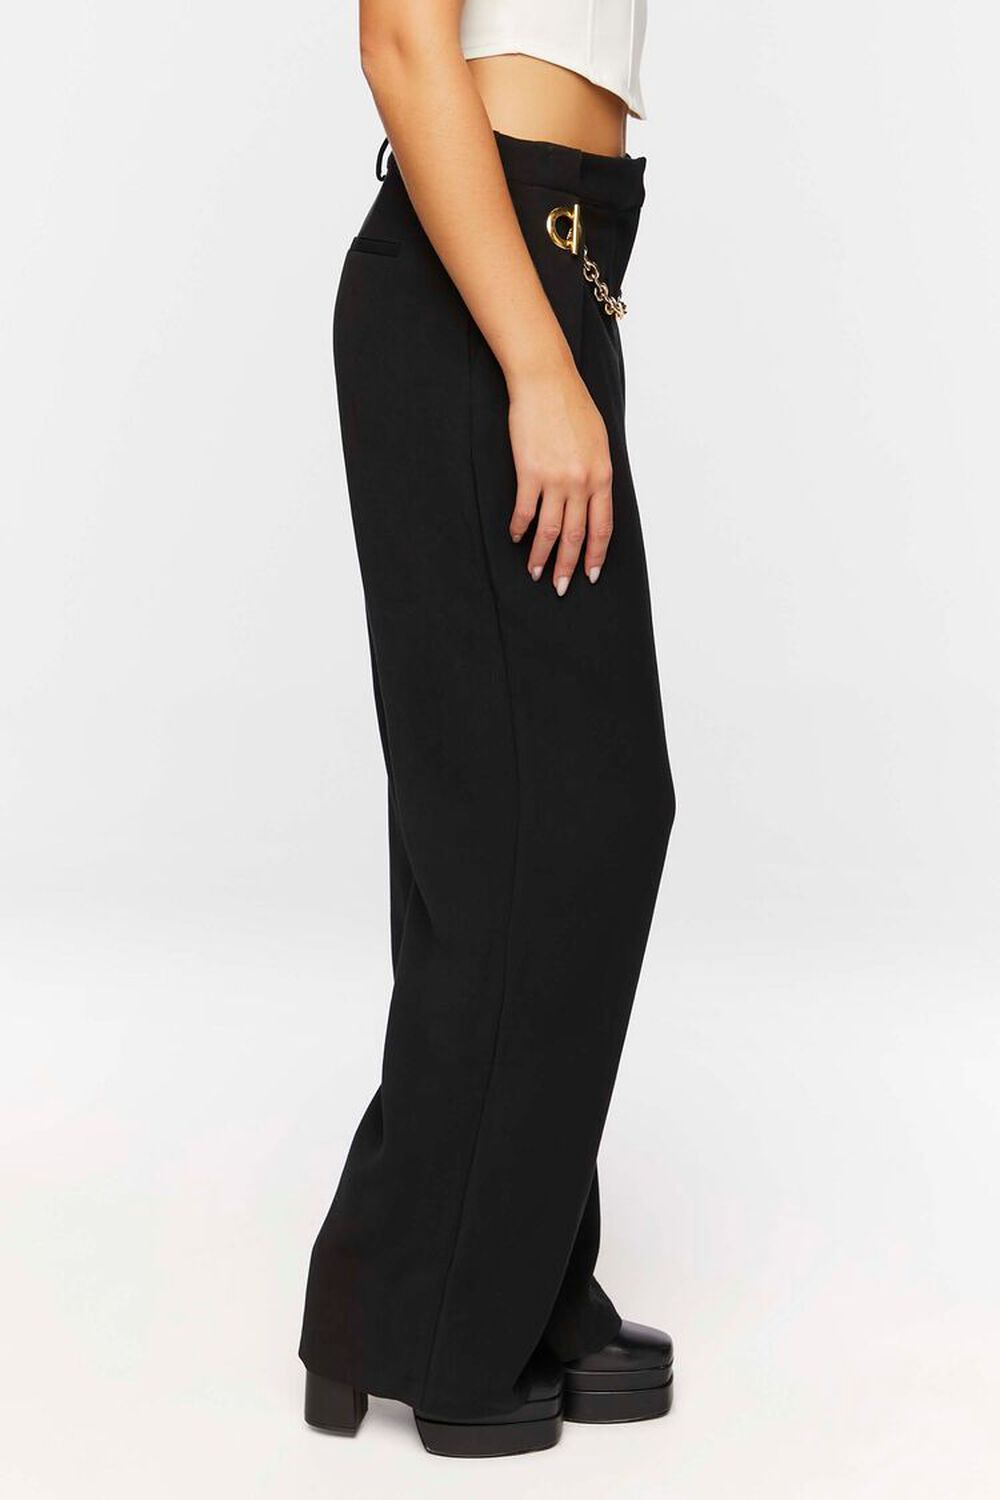 BLACK Toggle Chain High-Rise Trousers, image 3